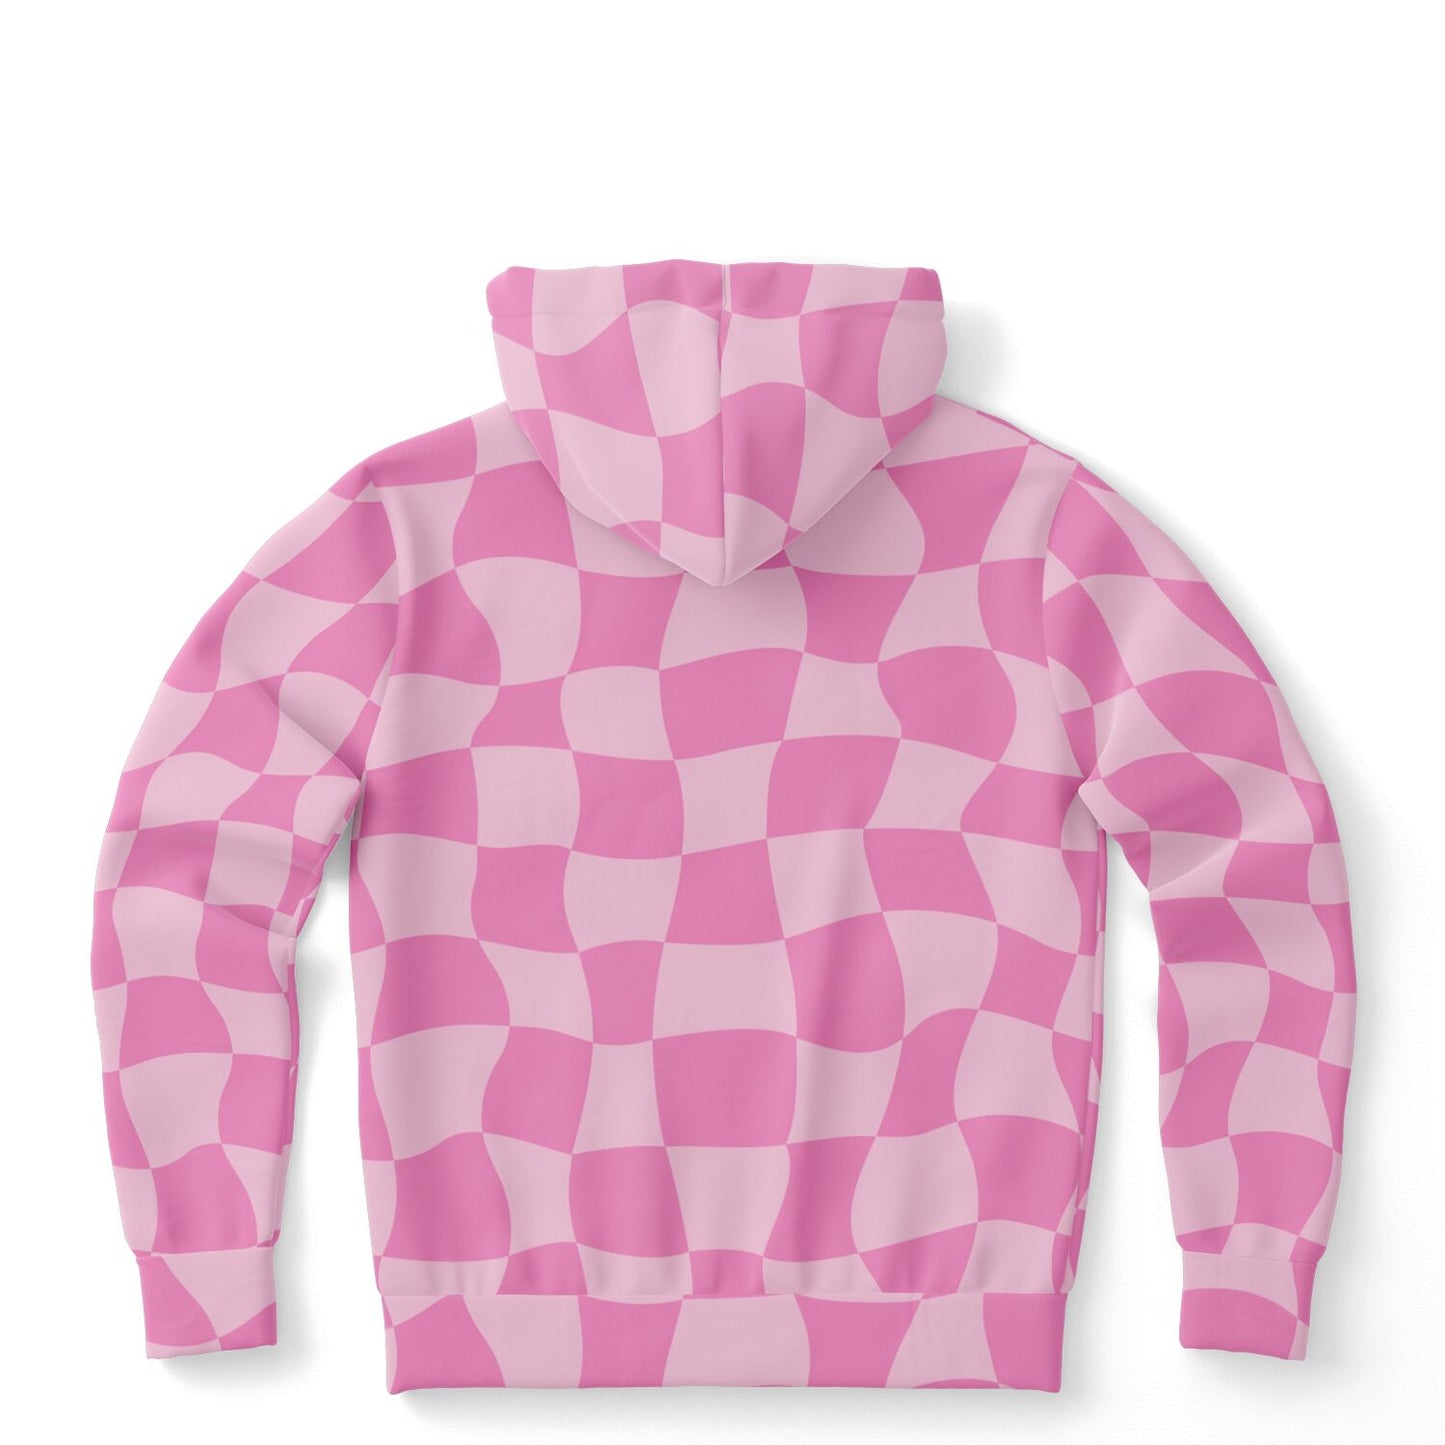 Pink Checkered Hoodie, Groovy Funky Trippy 70s Pullover Men Women Adult Aesthetic Graphic Cotton Hooded Sweatshirt with Pockets Starcove Fashion